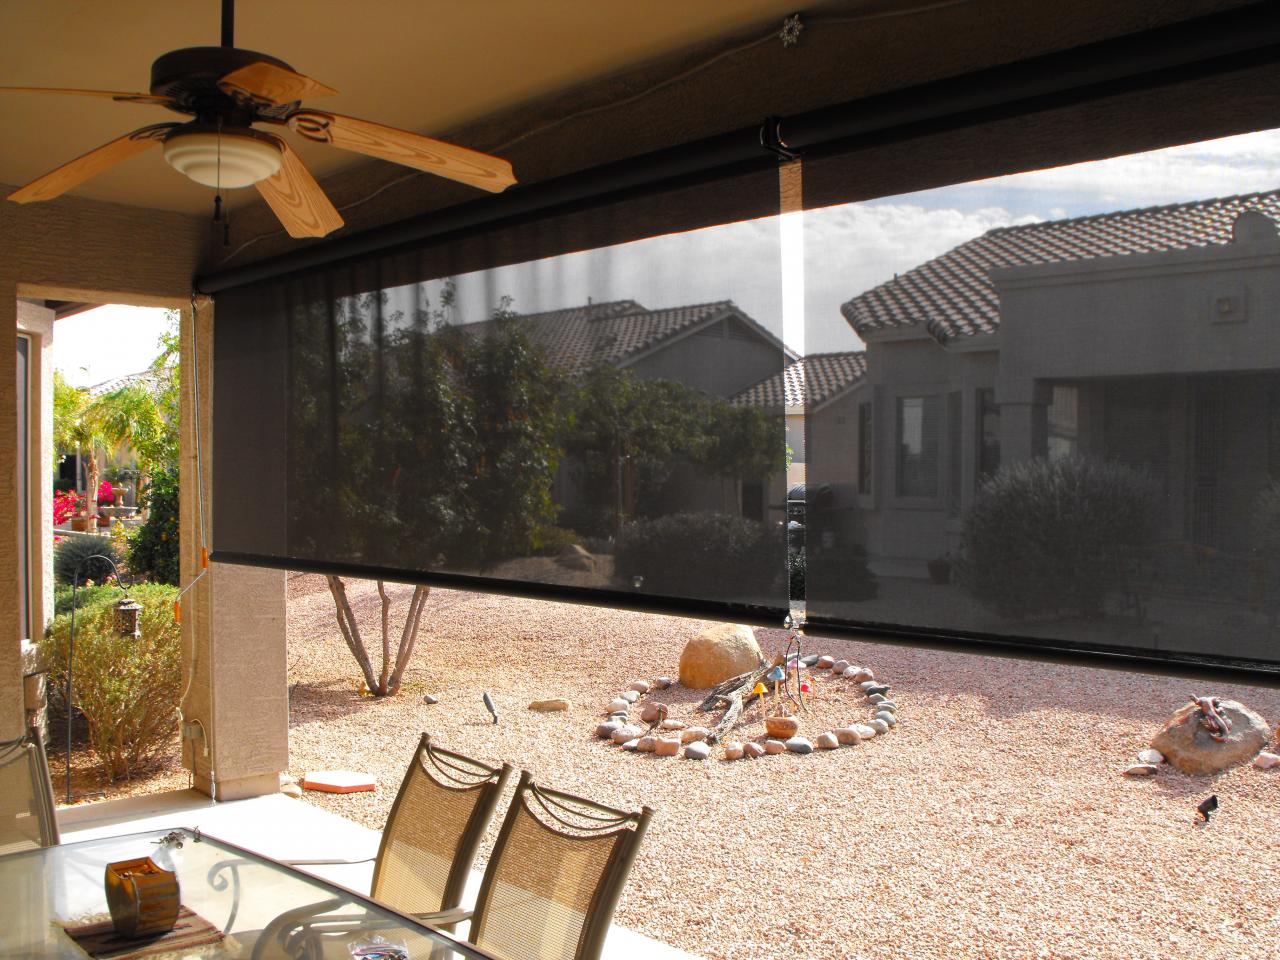 Sline Awning Patio Inc Drop Shades, Outdoor Solar Shades For Patio